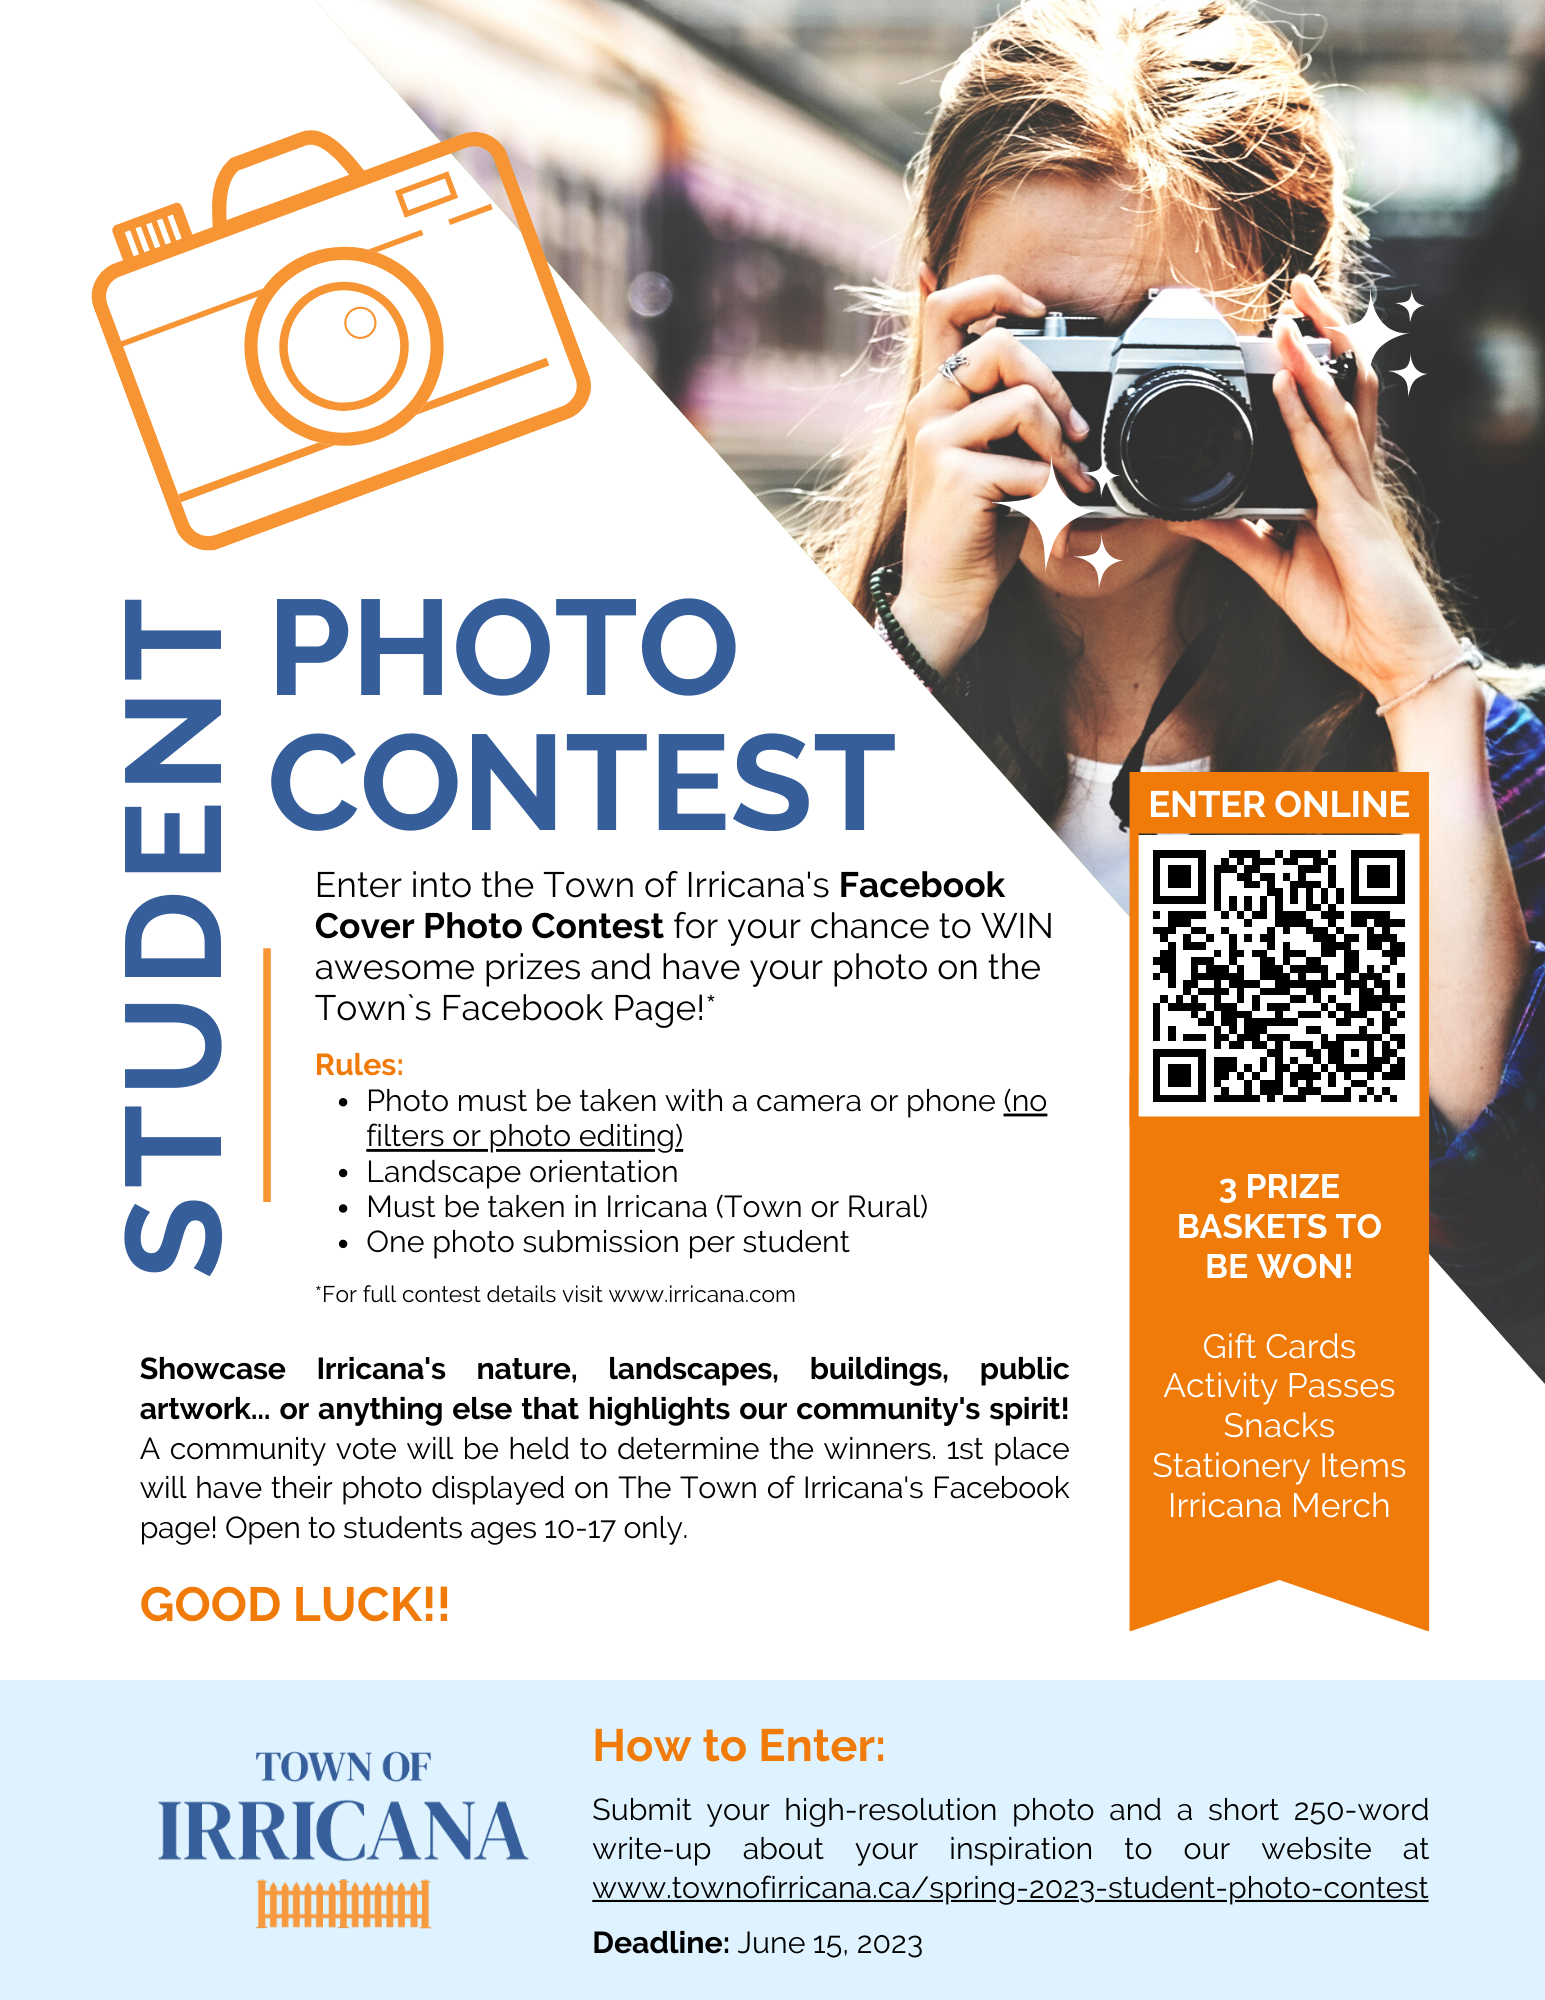 Town of Irricana Spring Photo Contest 2023 open to ages 10-17. Photo must be taken in Irricana. Contest ends June 15, 2023